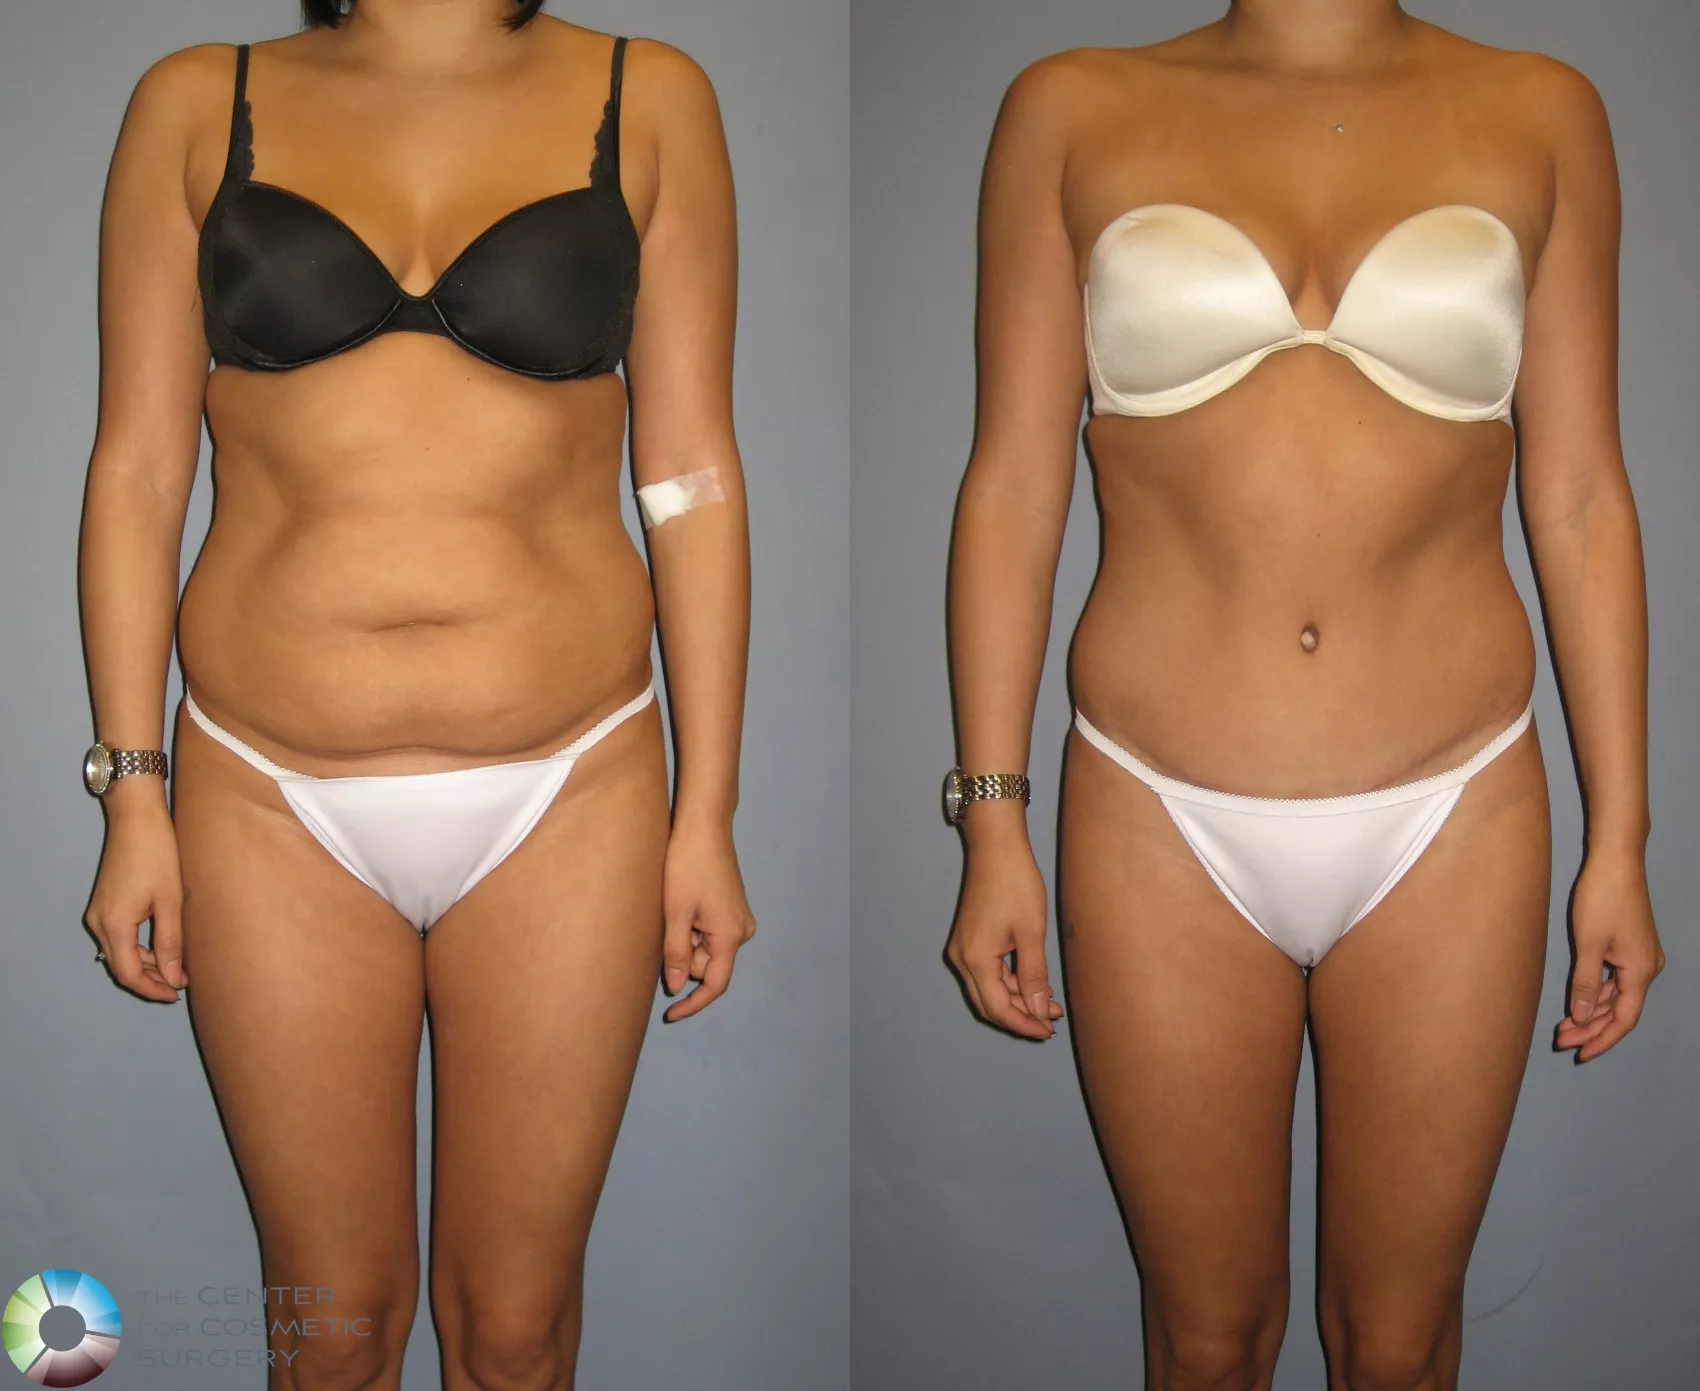 Amazing tummy tuck before and after surgery photos 4375